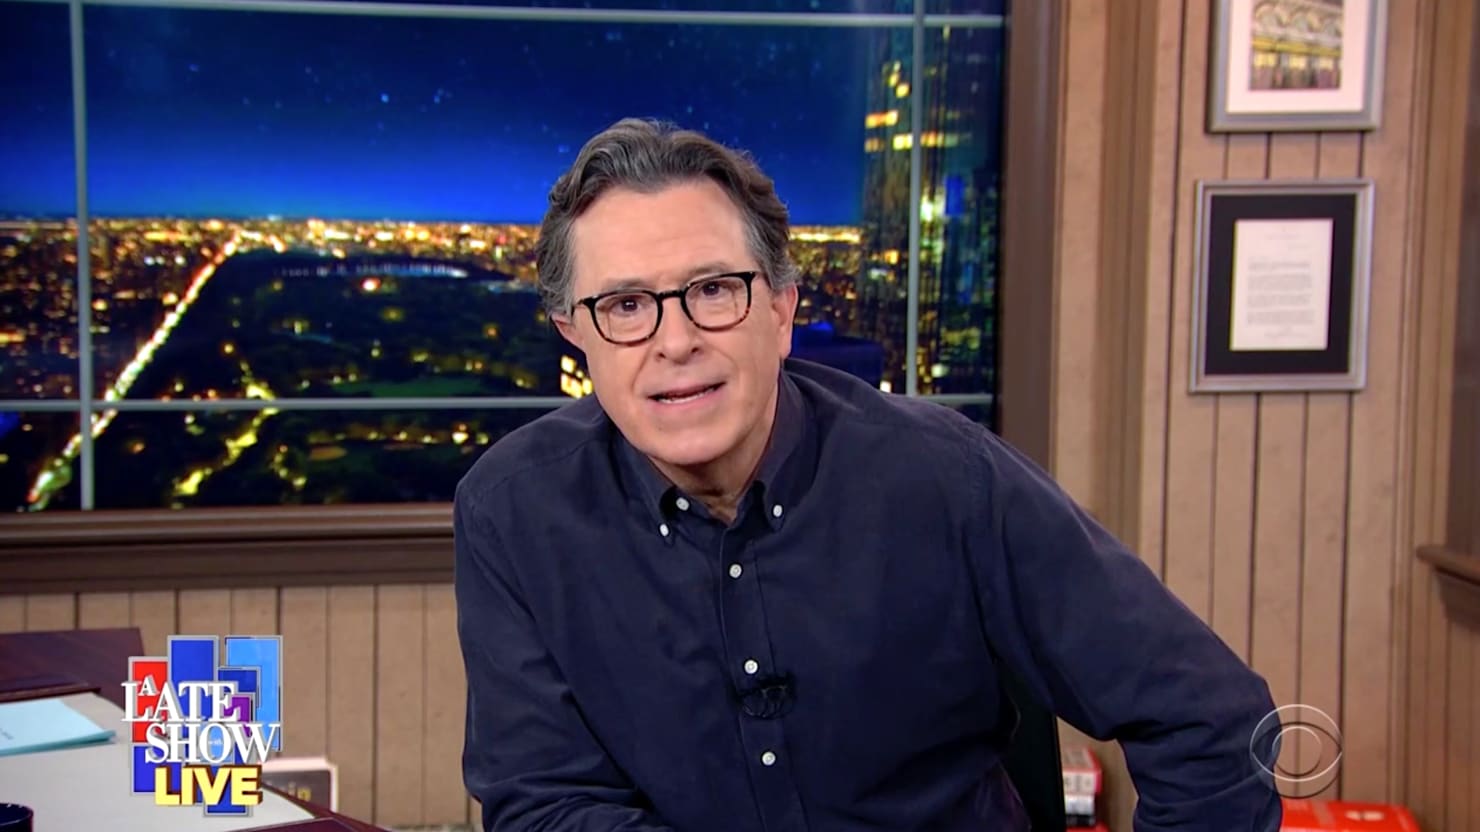 Stephen Colbert delivers furious toppling of Trump, GOP and Fox News after Capitol Riot